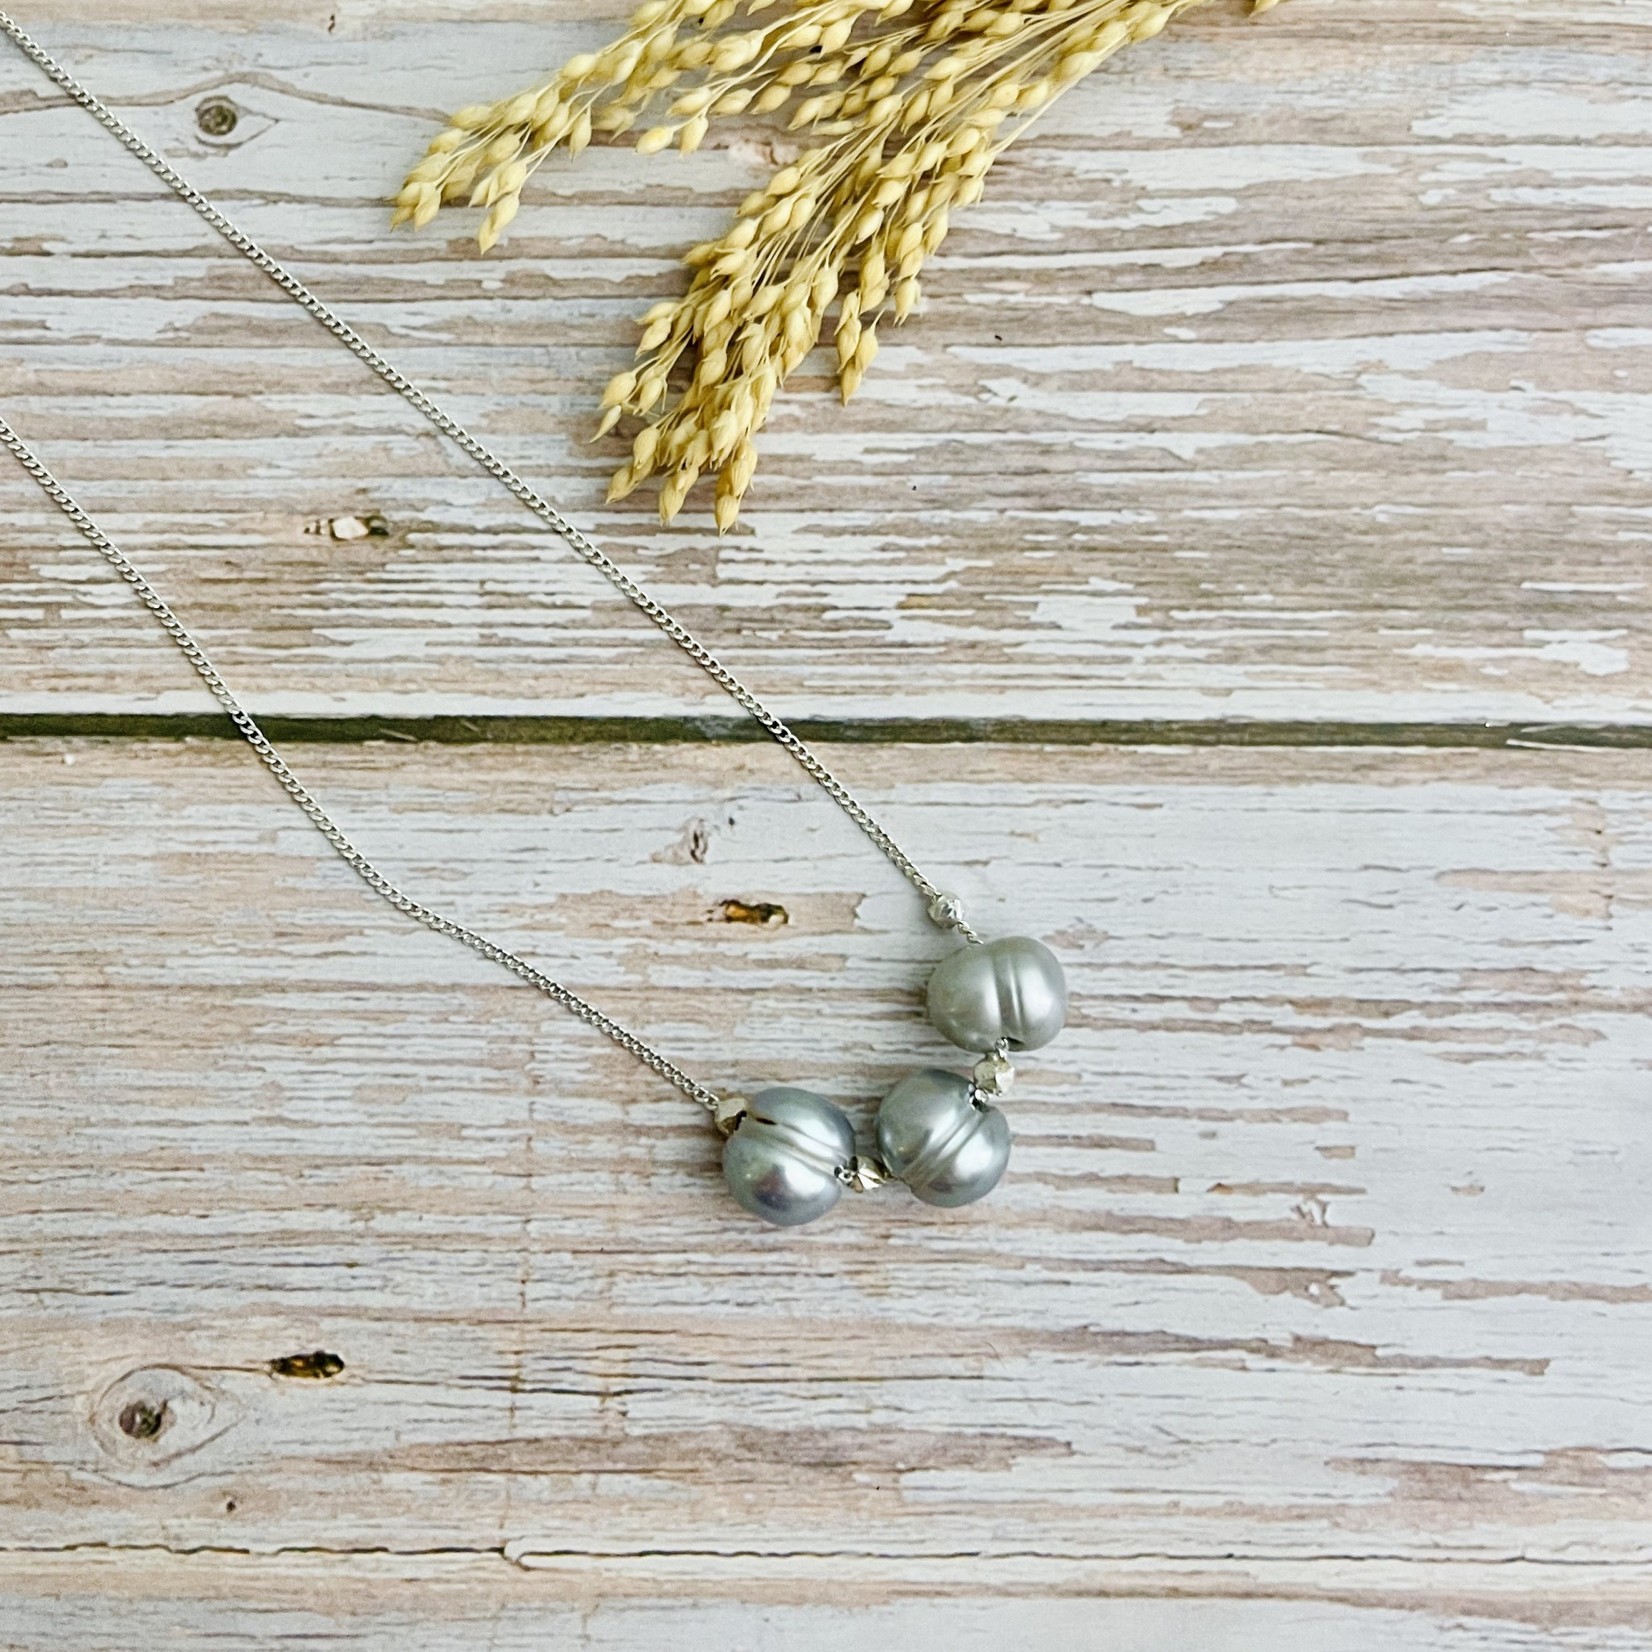 Handmade Silver Necklace with 3 grey pearls, 5 faceted silver, cuban chain